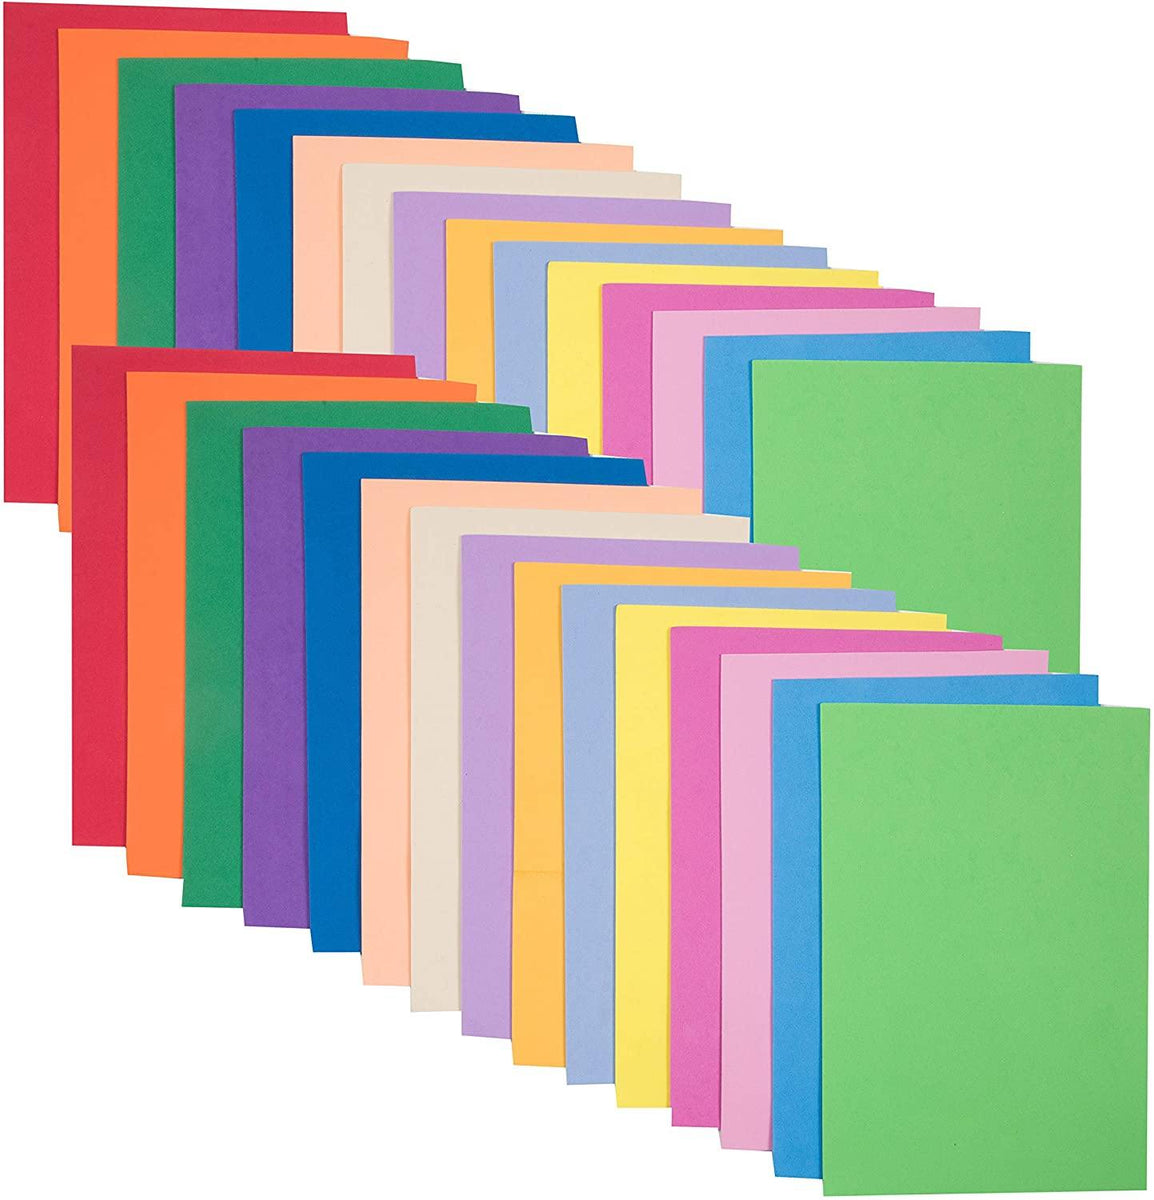 A4 EVA Craft Funky Foam Sheets 10 Pack 2mm Thick Approx 10 Assorted Colours